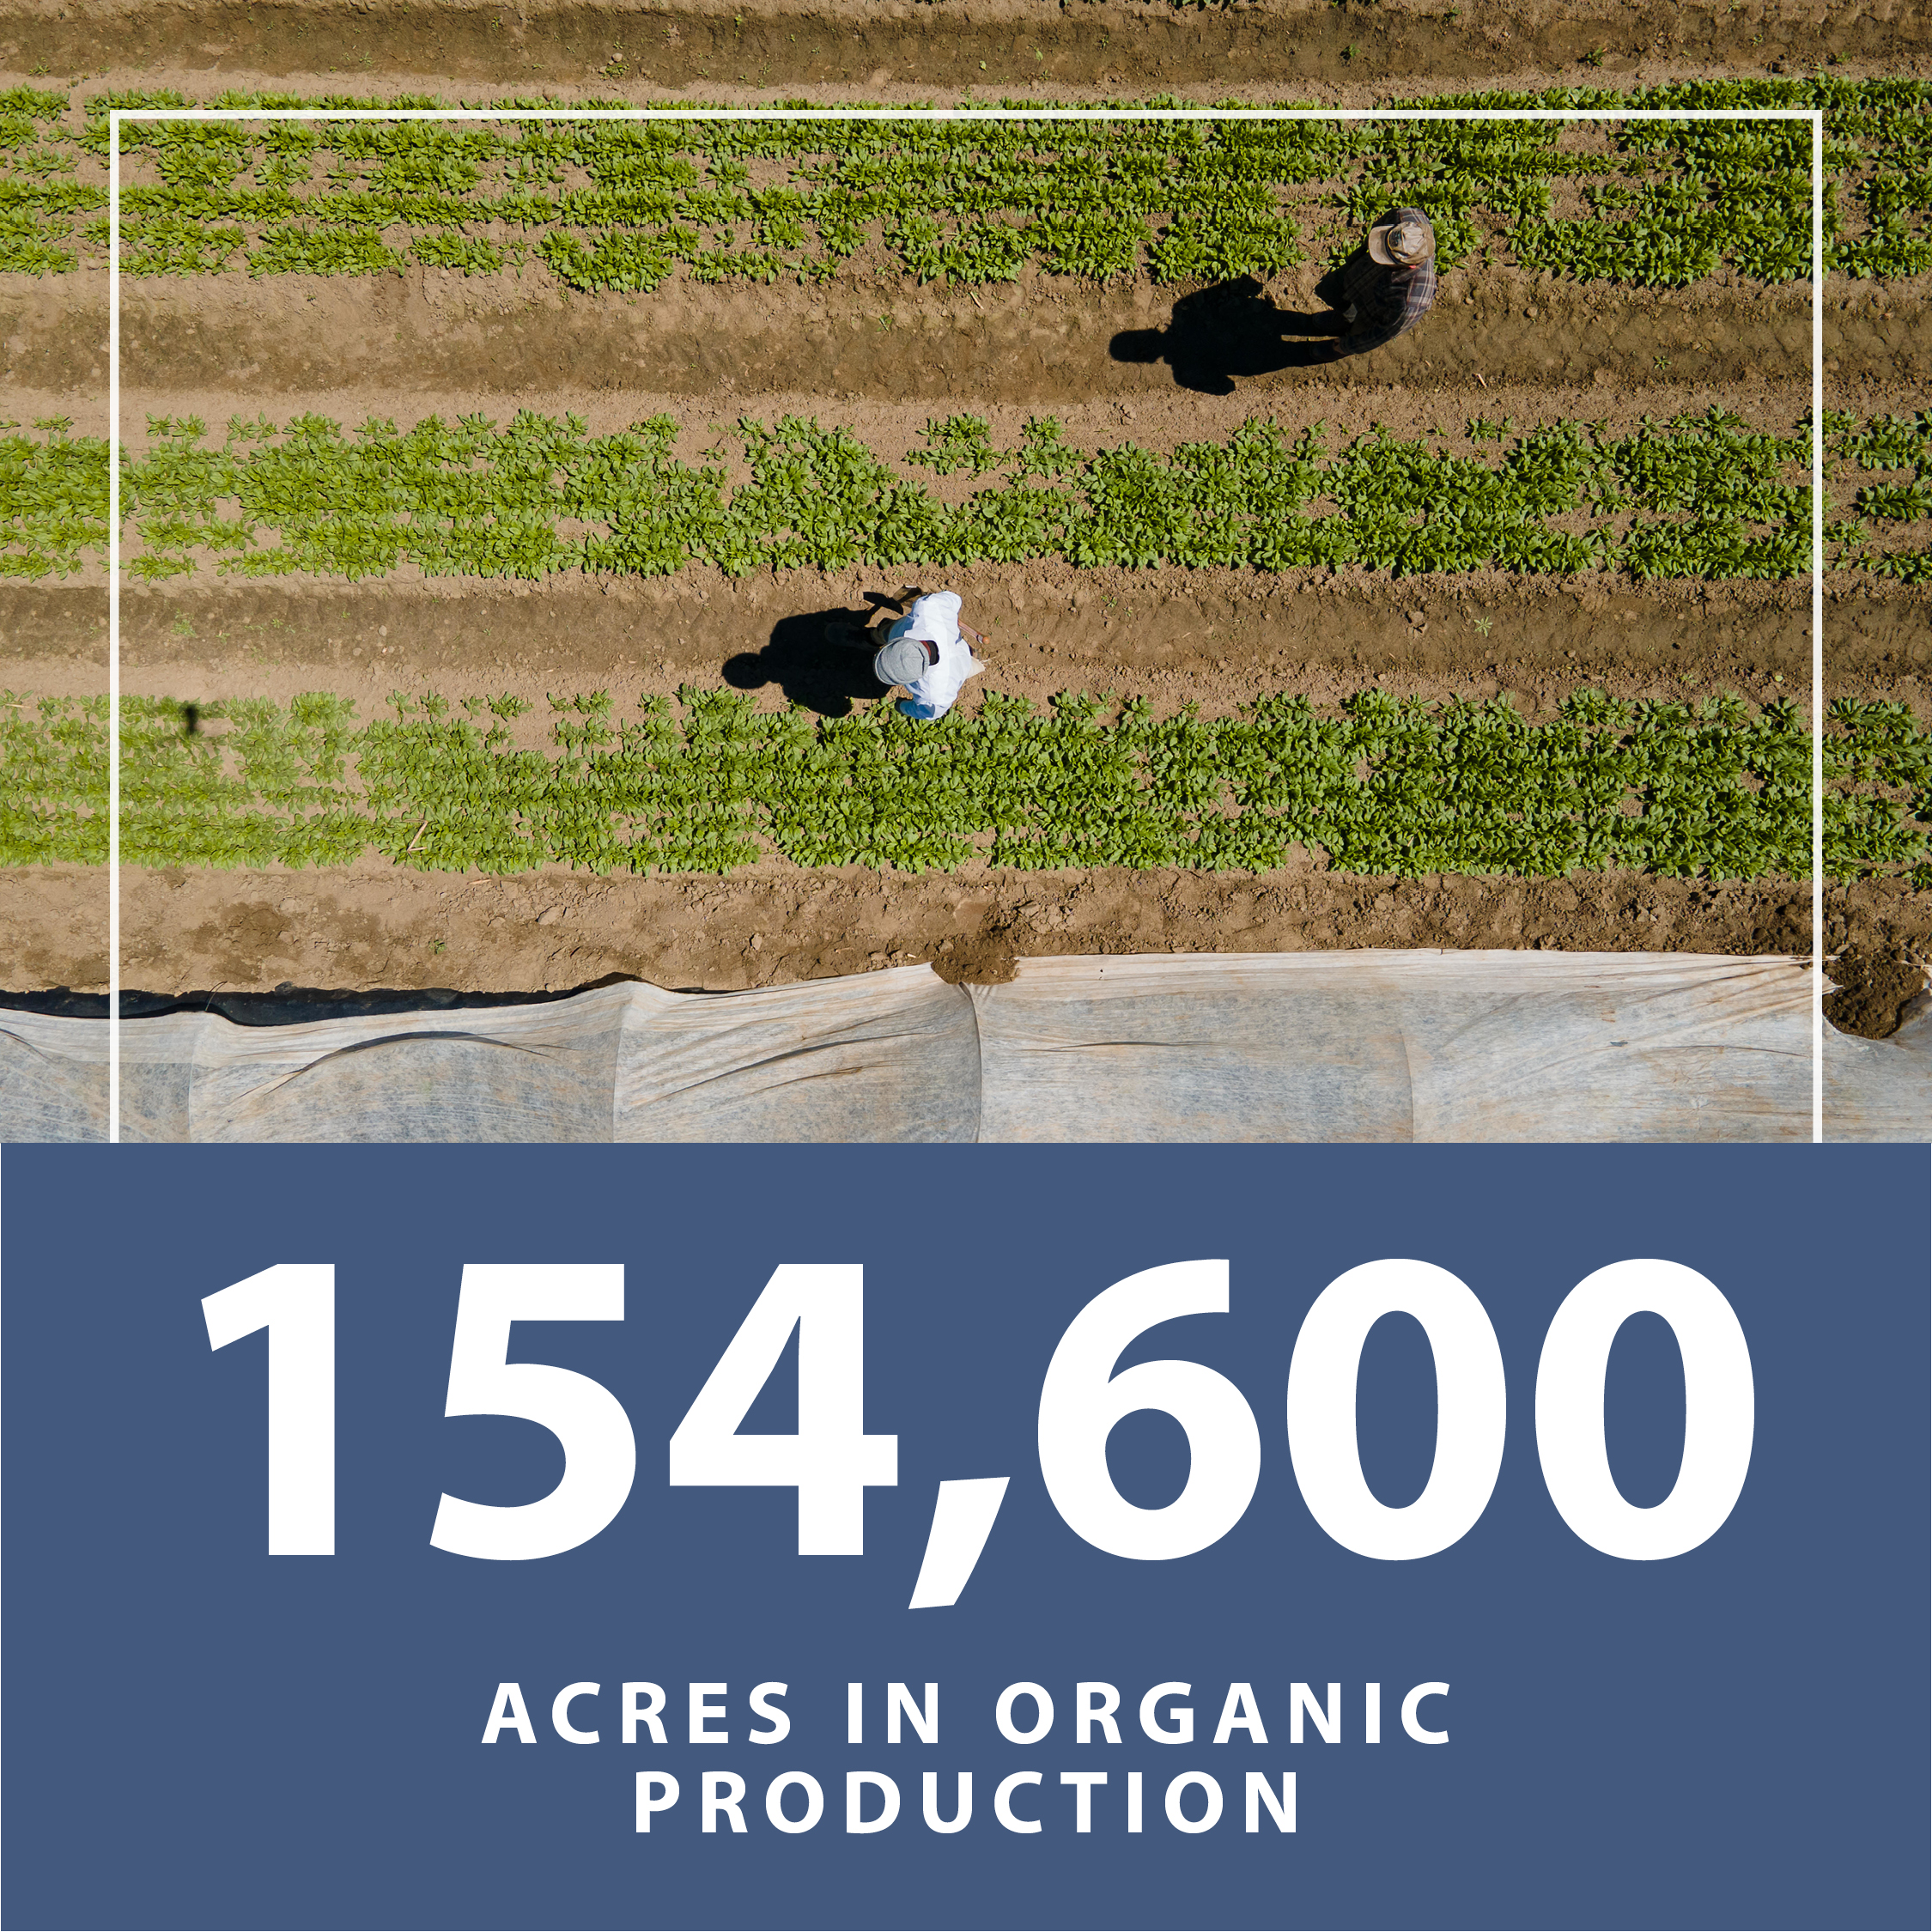 Text reads "154000 acres in organic production"